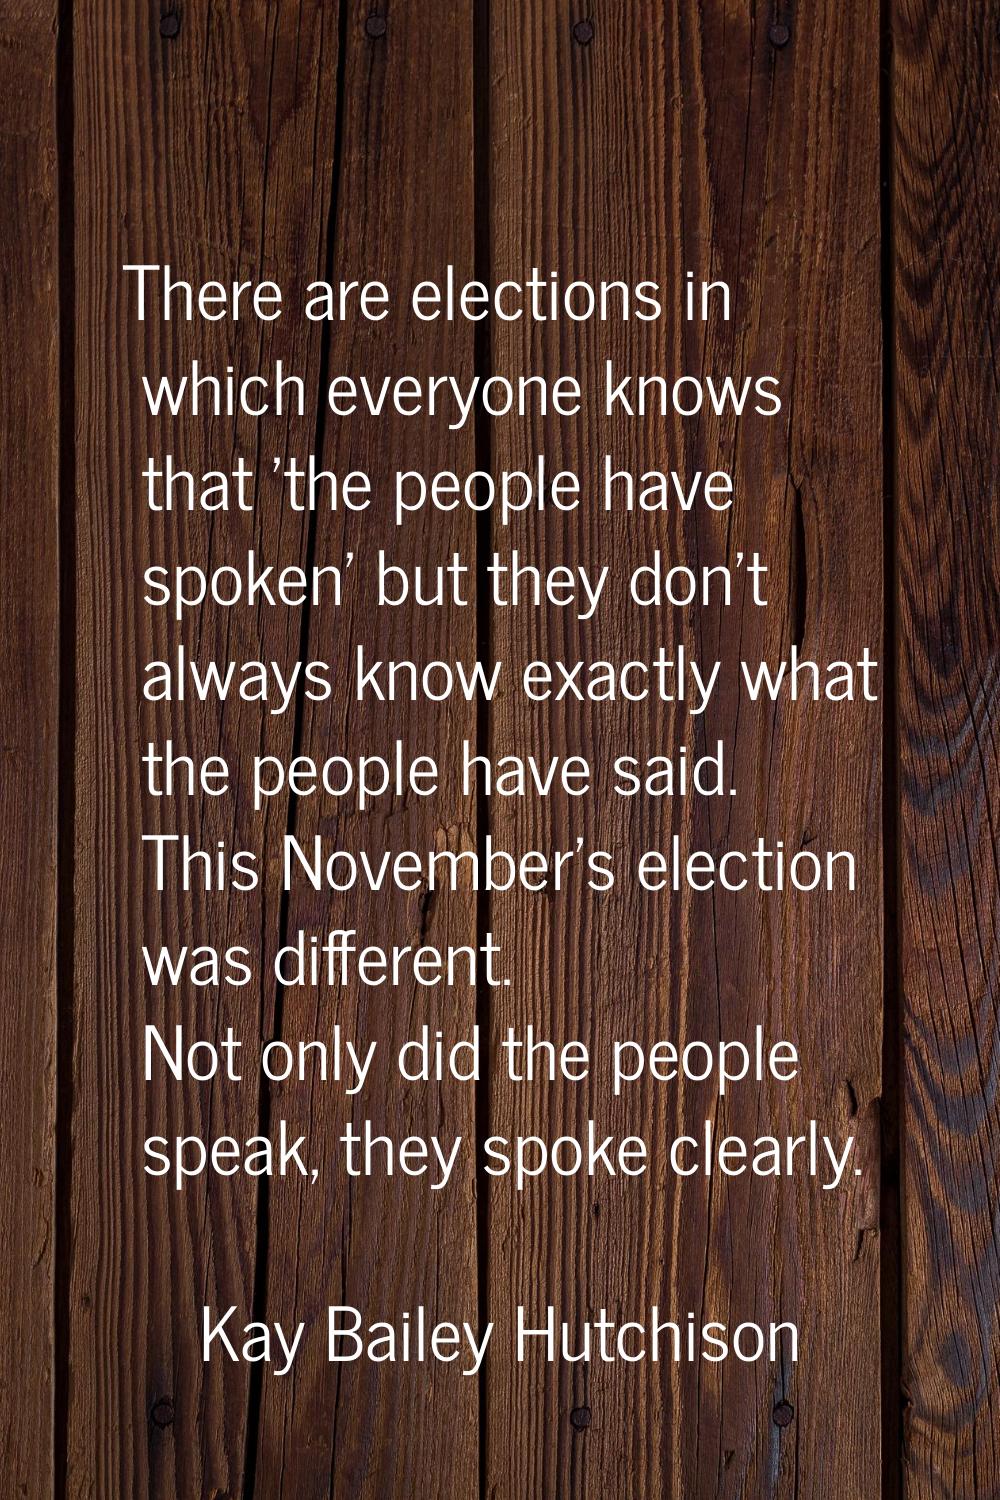 There are elections in which everyone knows that 'the people have spoken' but they don't always kno